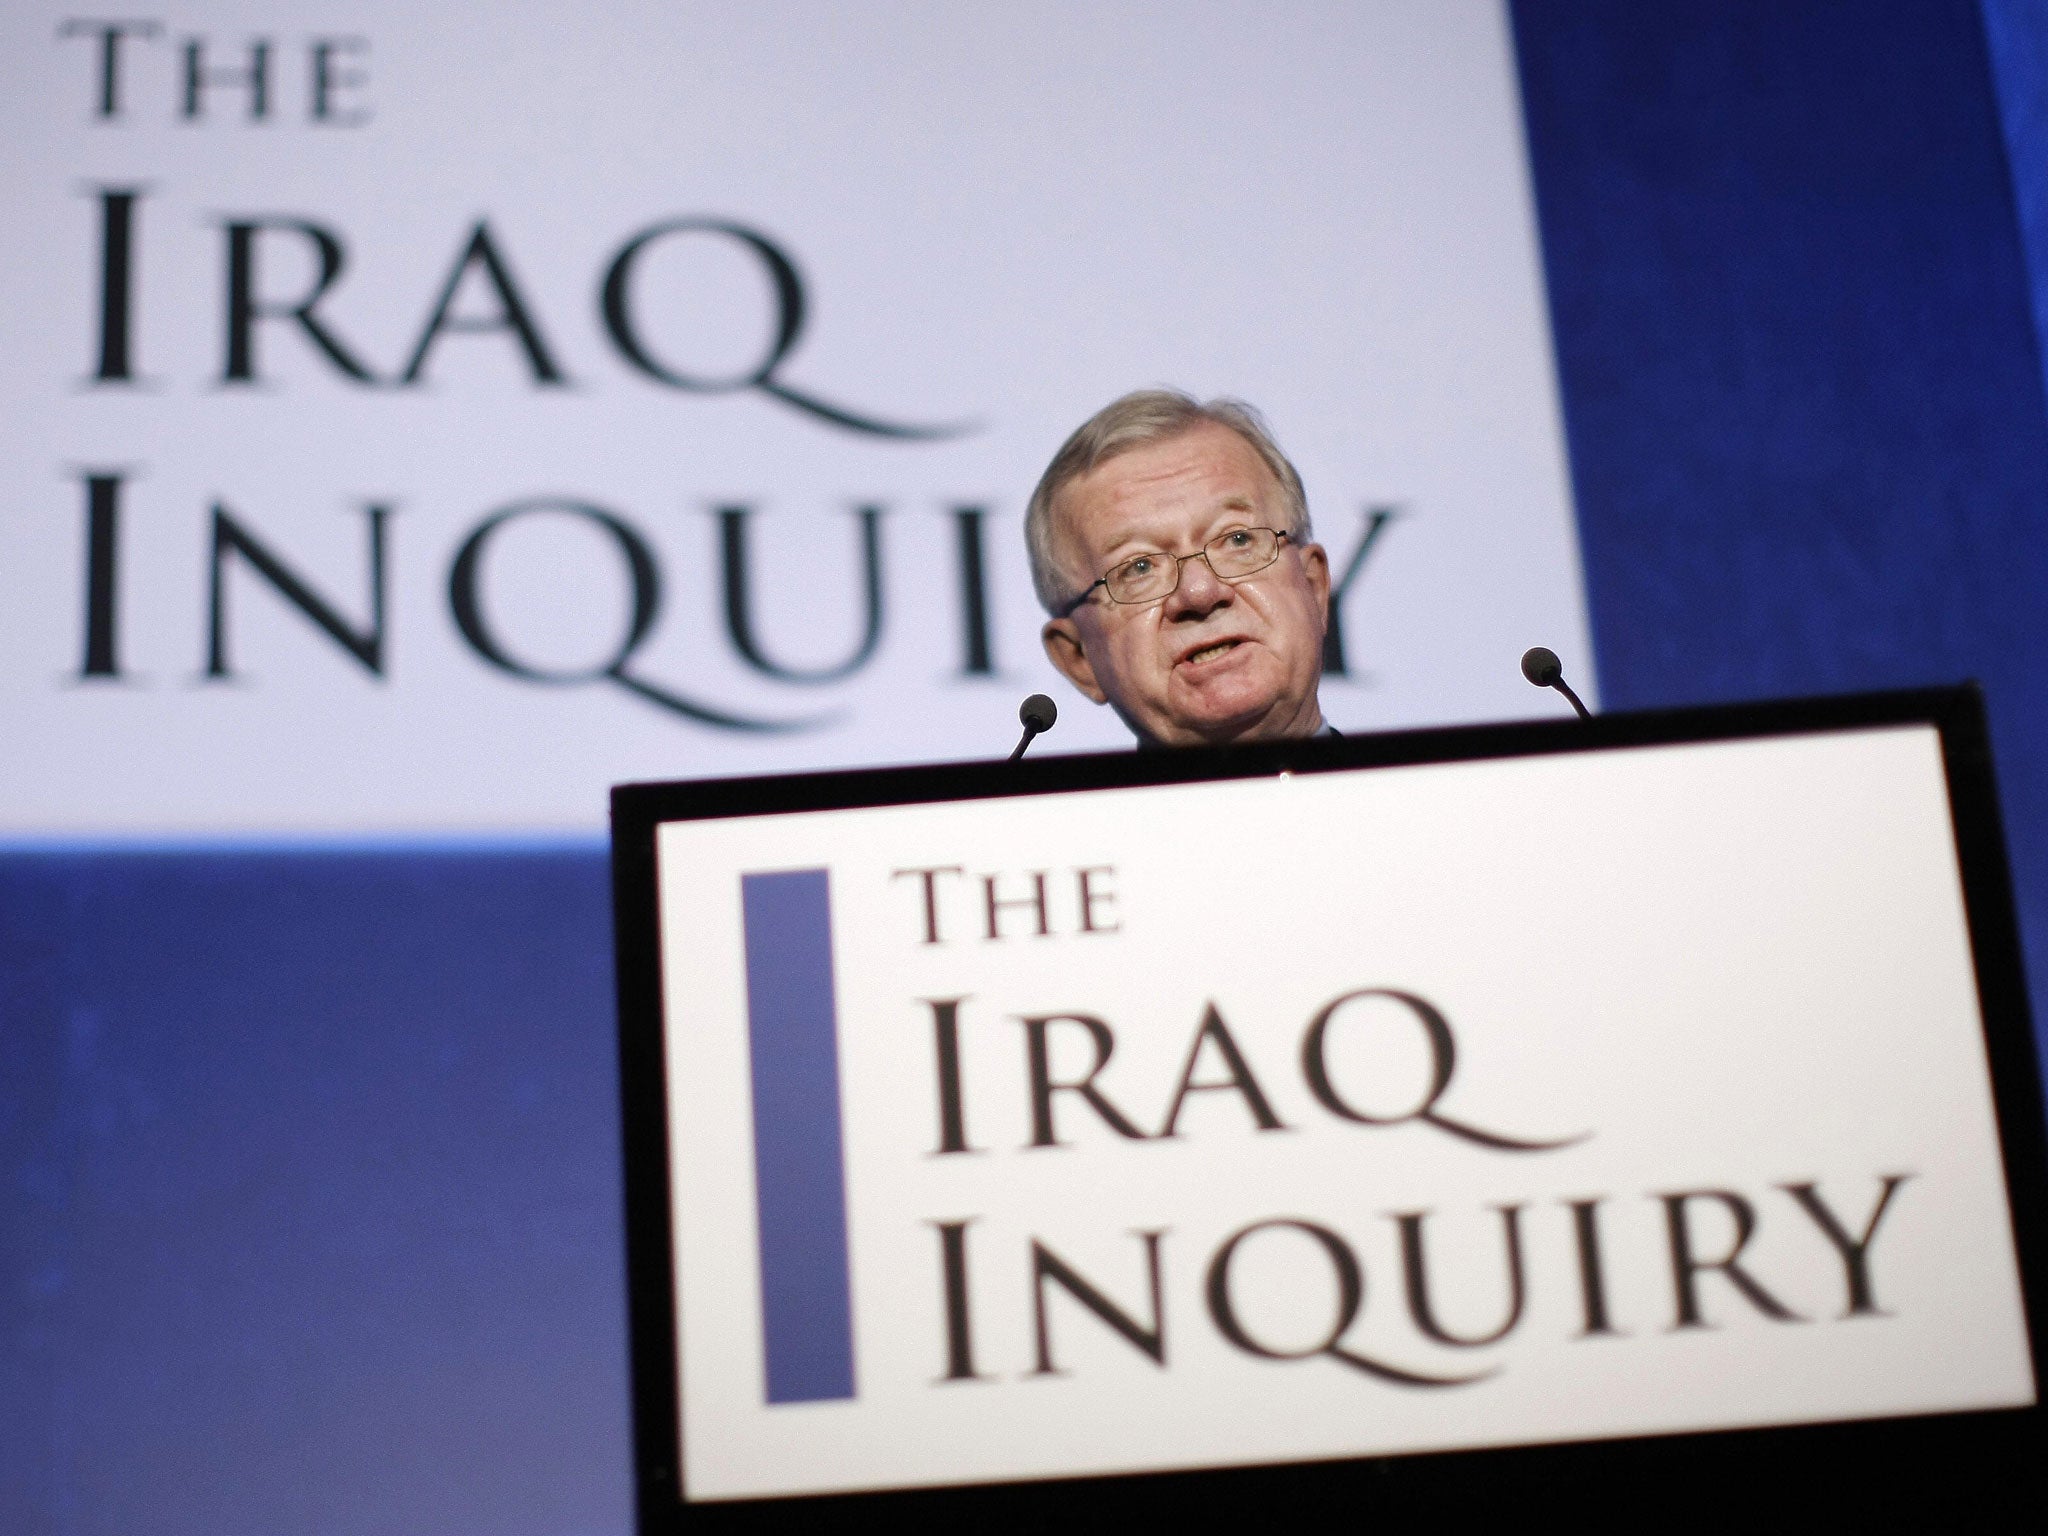 Sir John Chilcot opened his two-year inquiry in 2009